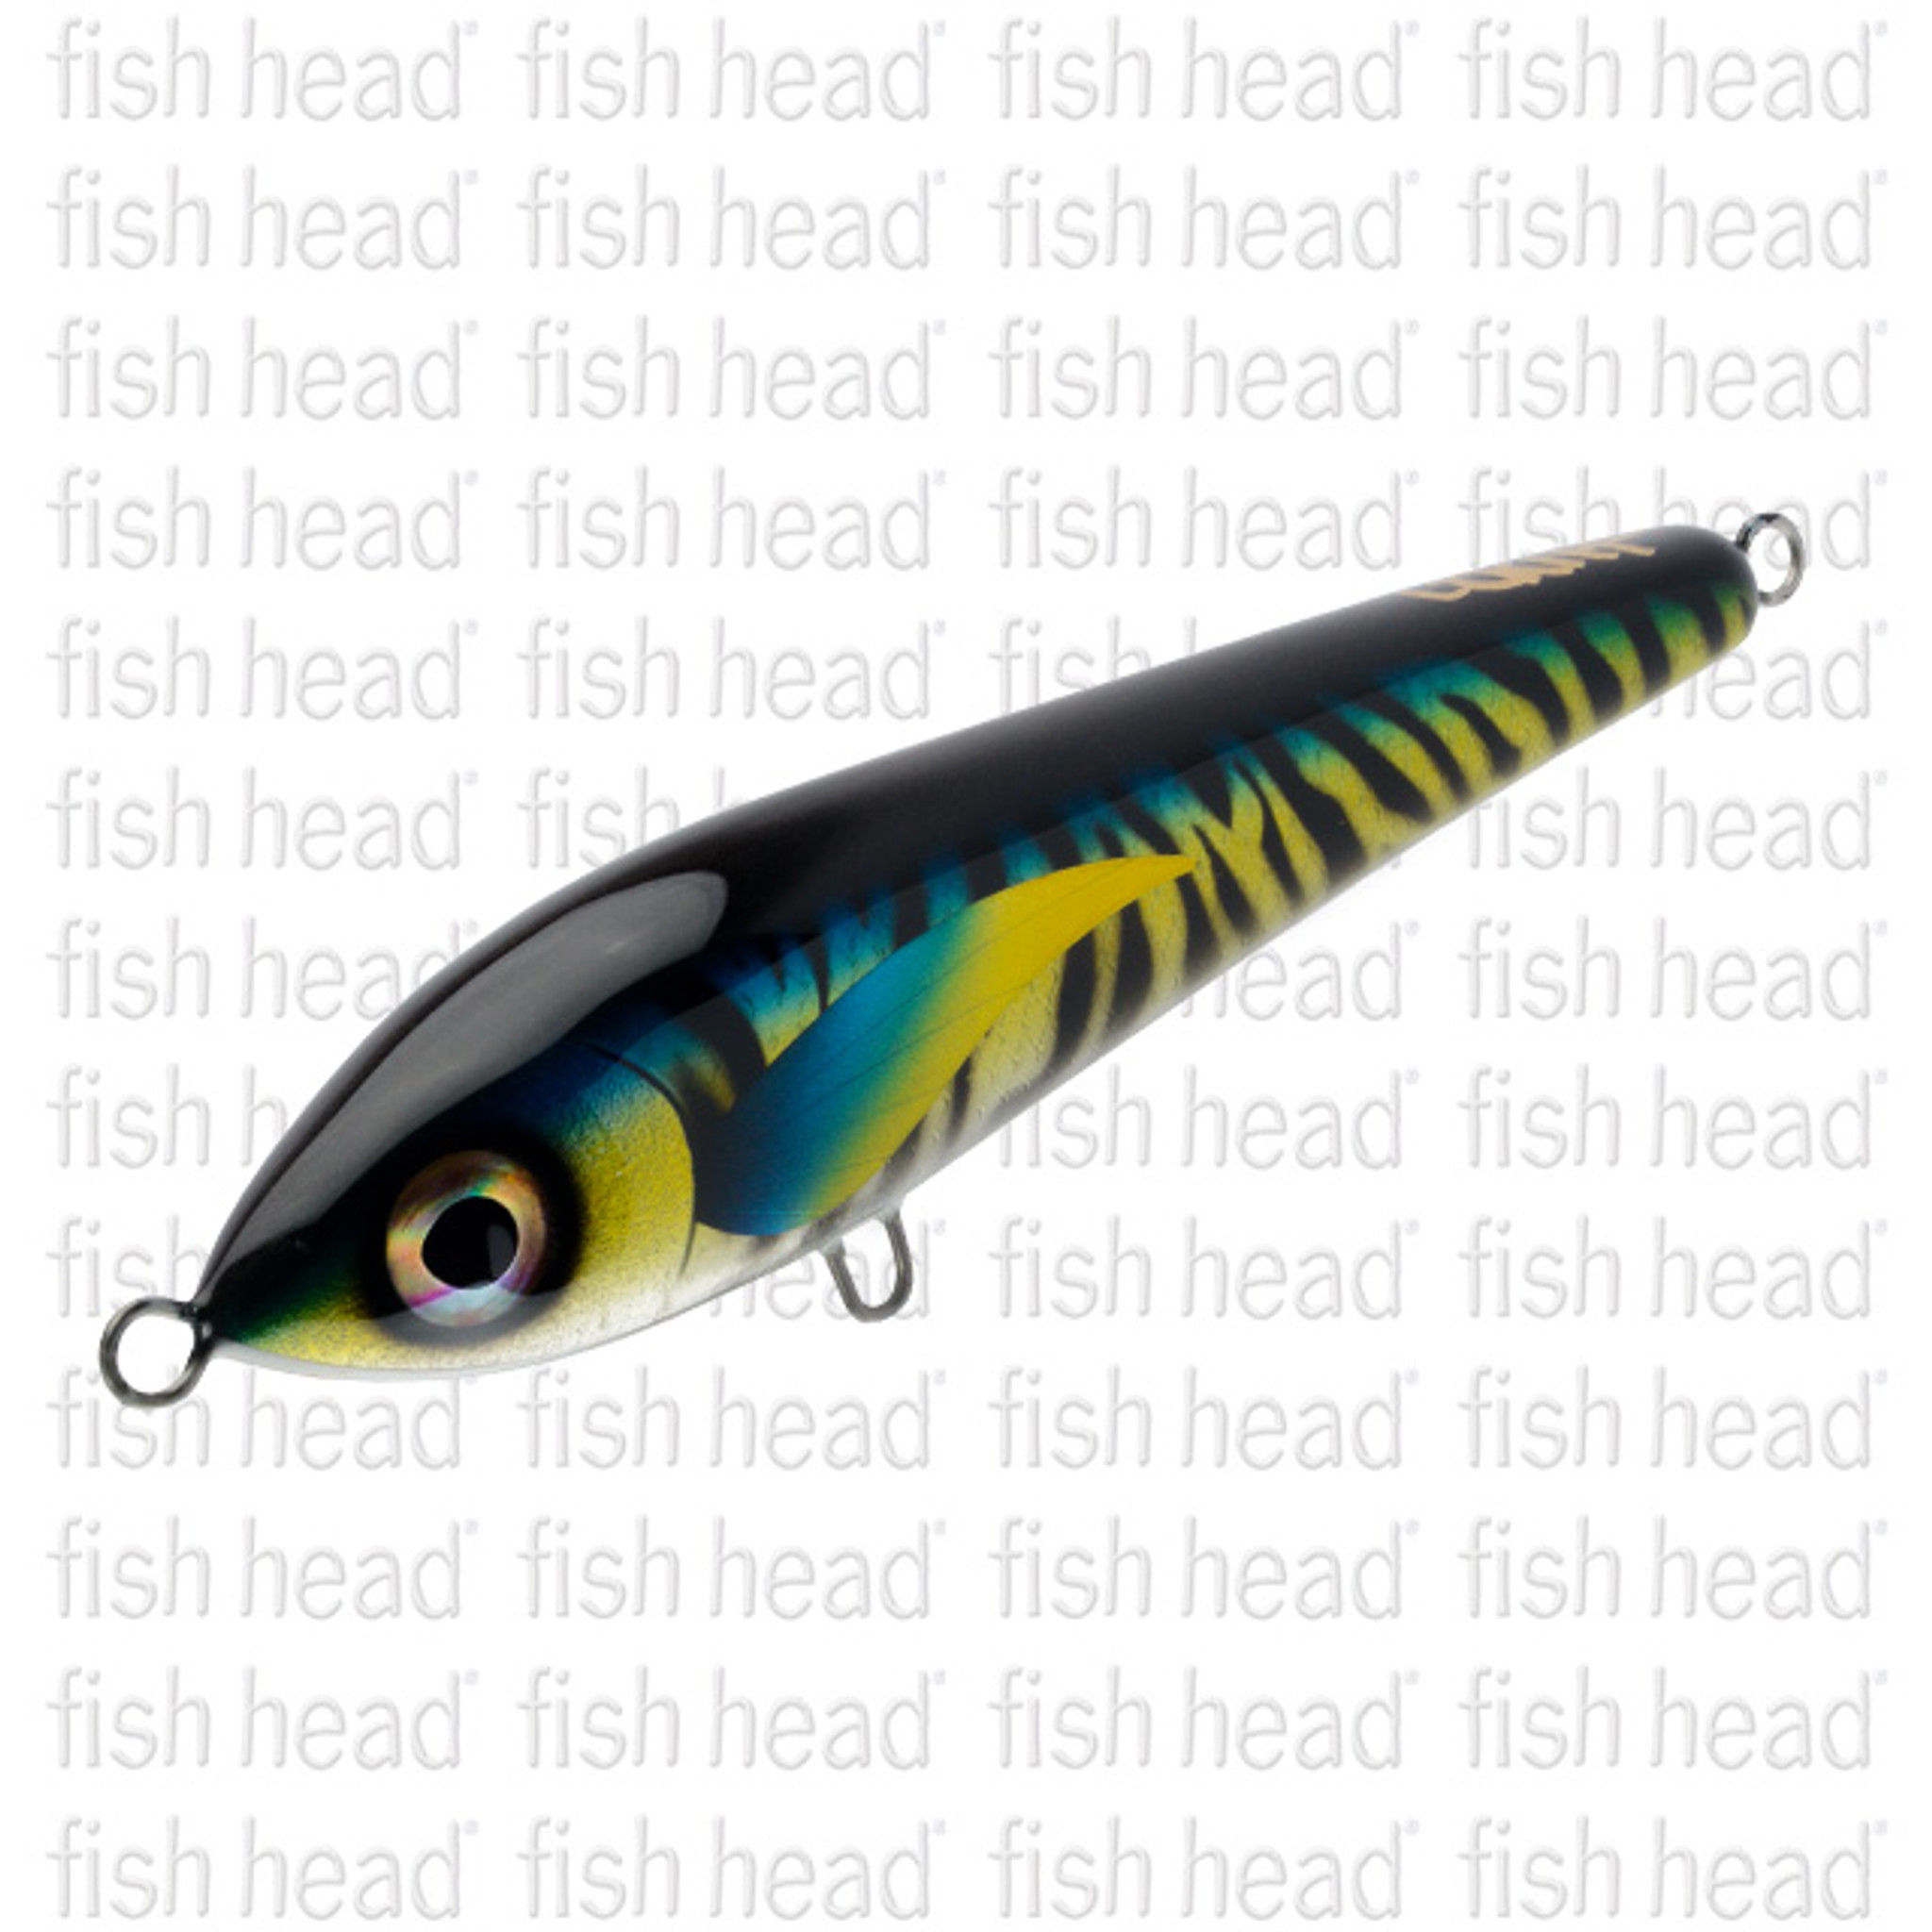 https://cdn11.bigcommerce.com/s-urlny/images/stencil/2048x2048/products/2786/7654/Griff_Lures_180mm_80g_Potshot_Cover__32612.1696917910.jpg?c=2